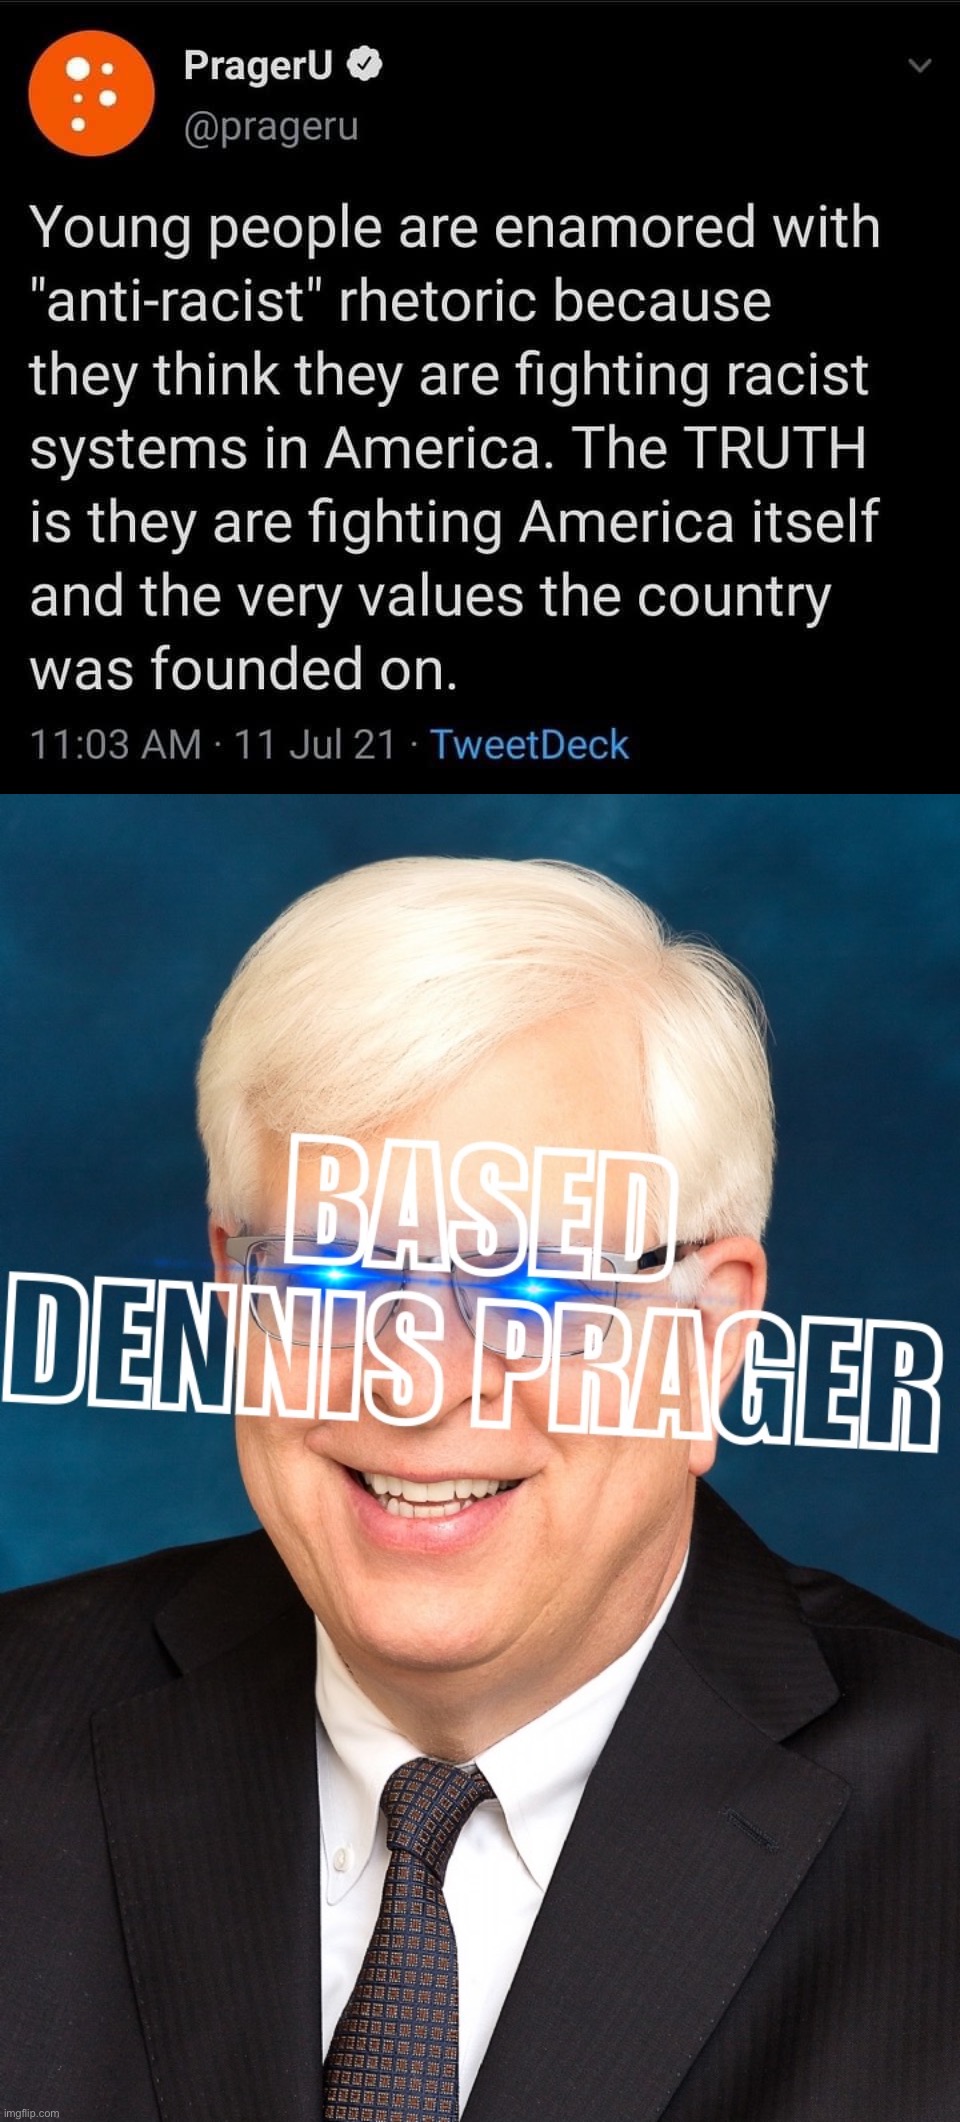 I see what you did there, Dennis — way to subtly subvert your audience’s expectations | image tagged in prageru based,based dennis prager,prager,dennis prager,tweet,propaganda | made w/ Imgflip meme maker